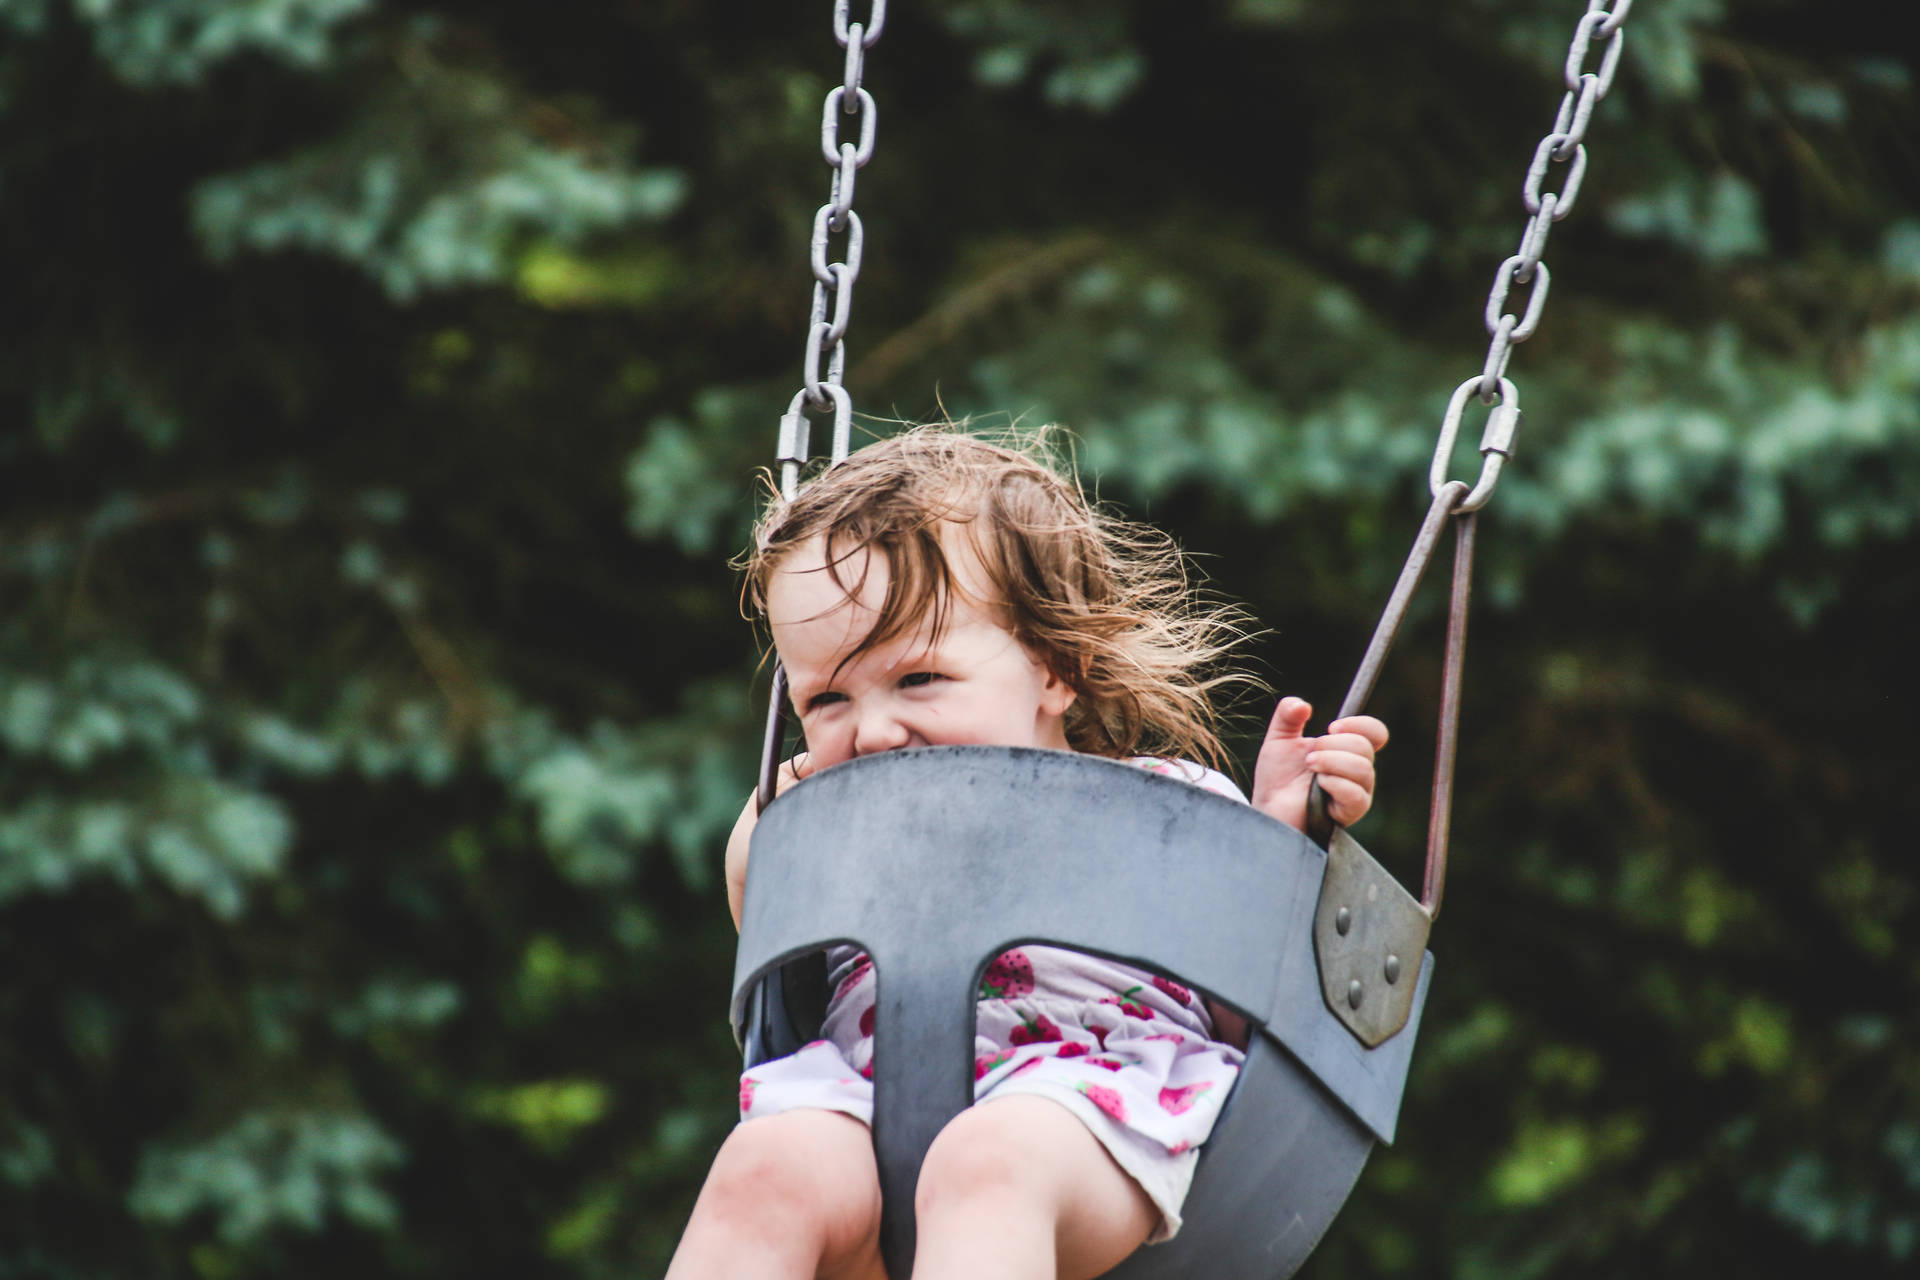 Young Girl On Playground Swing Background